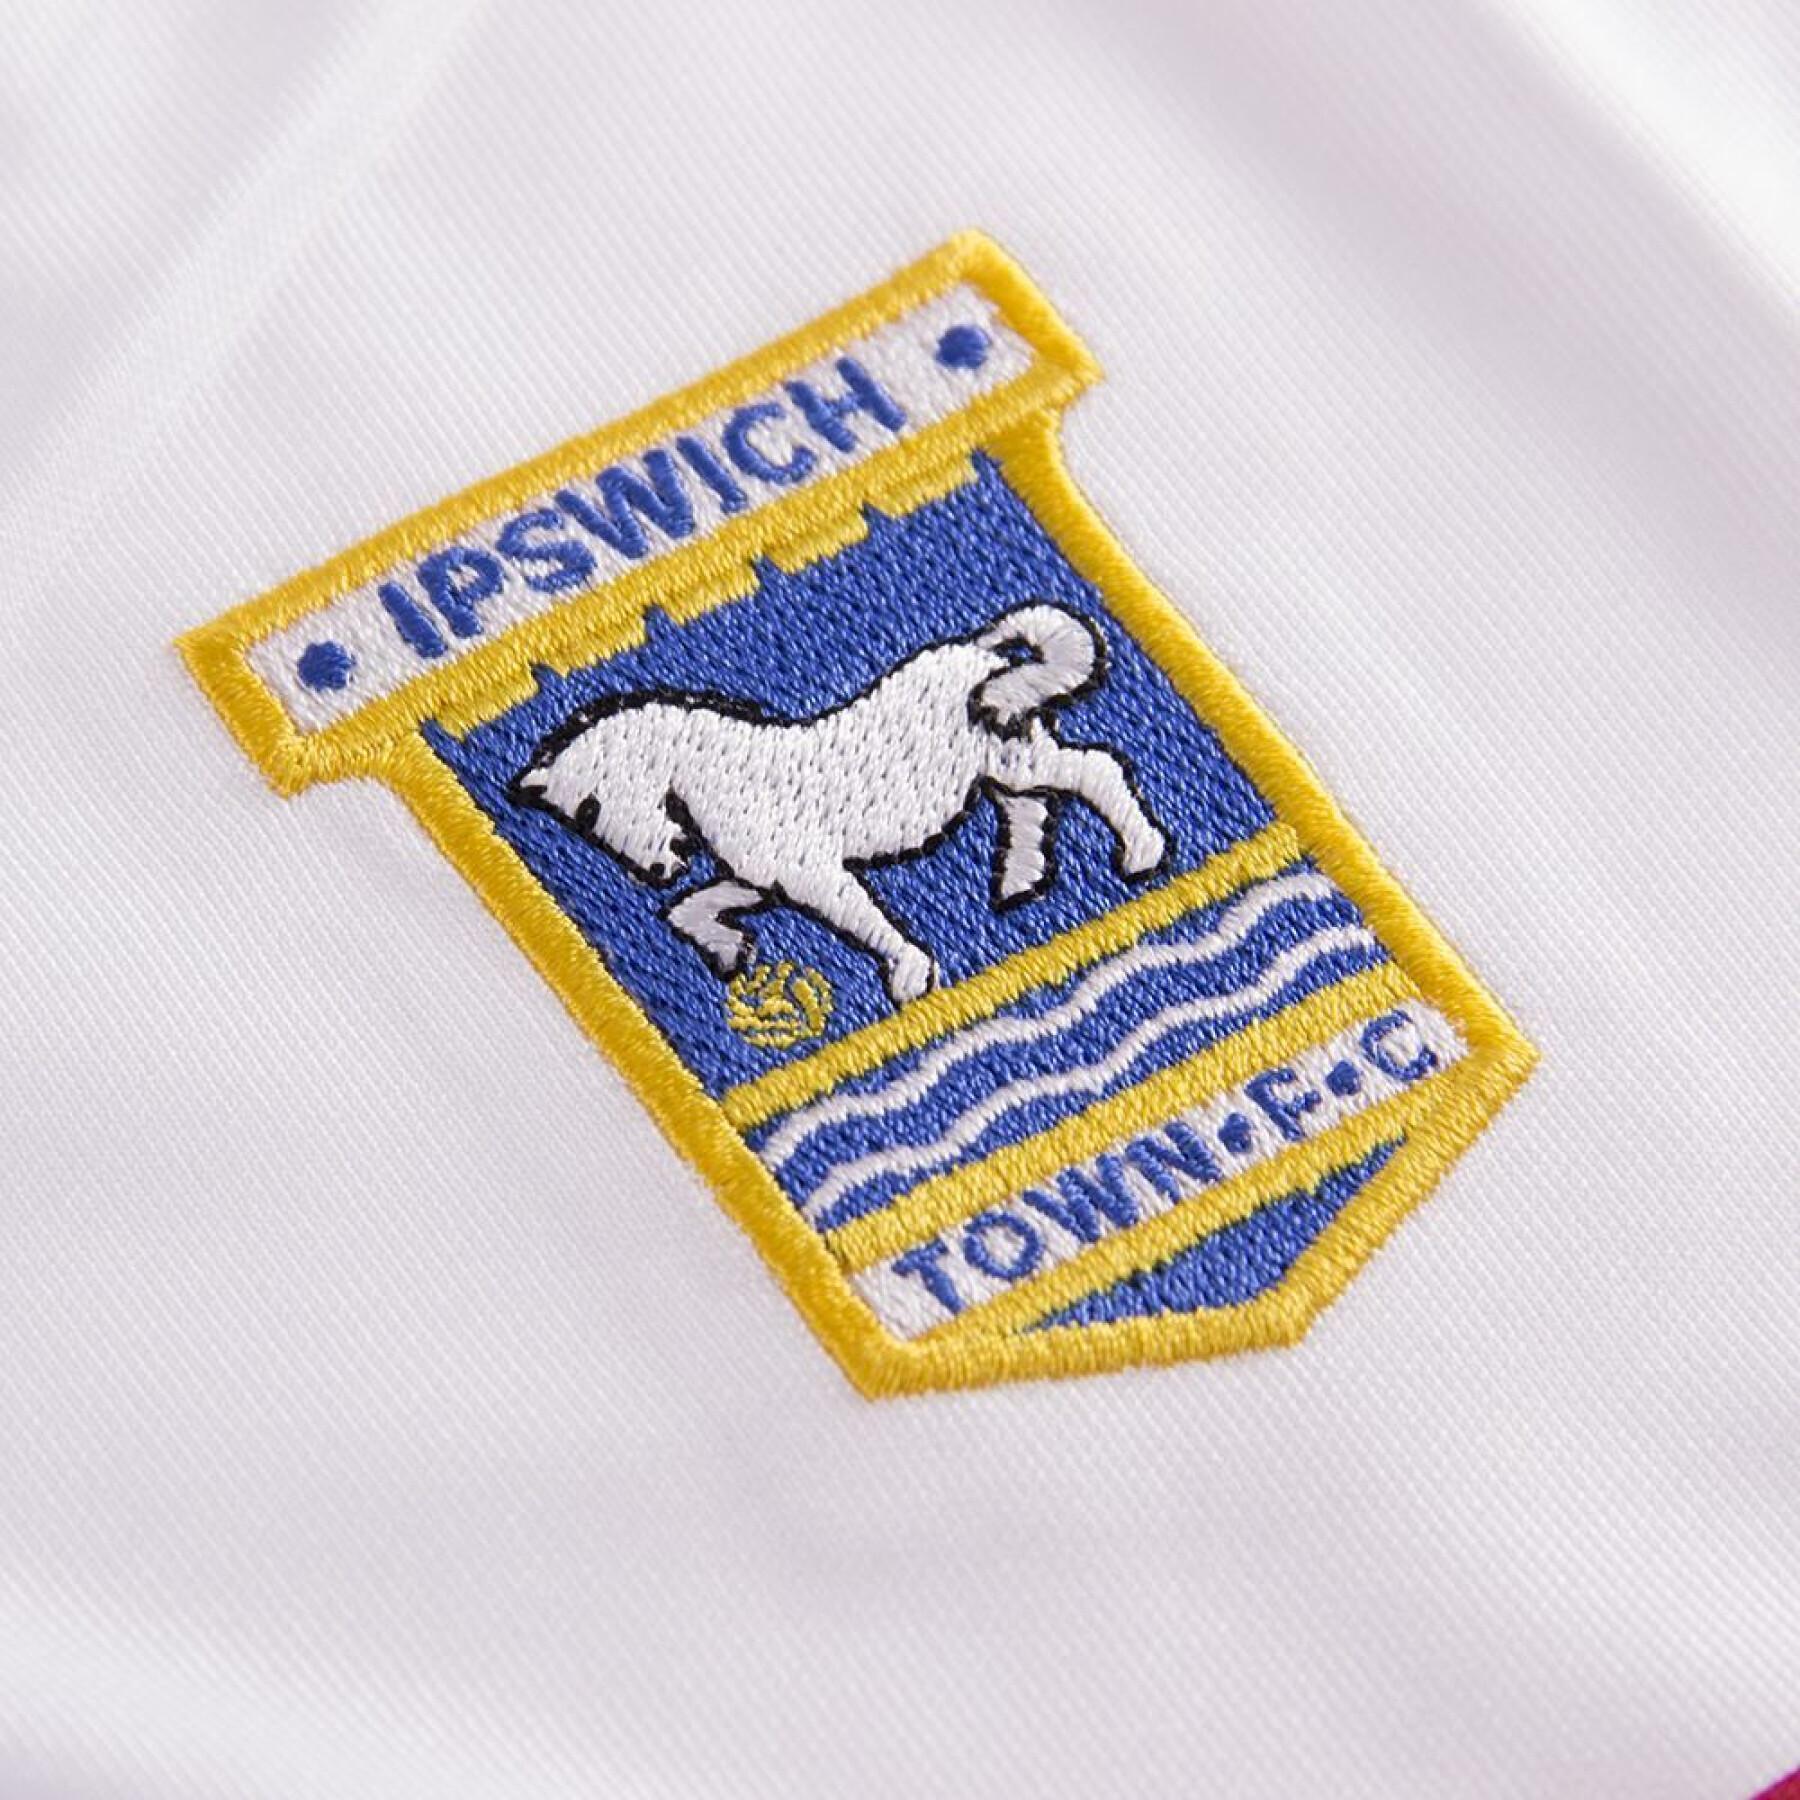 Maillot Ipswich Town FC 1985/86